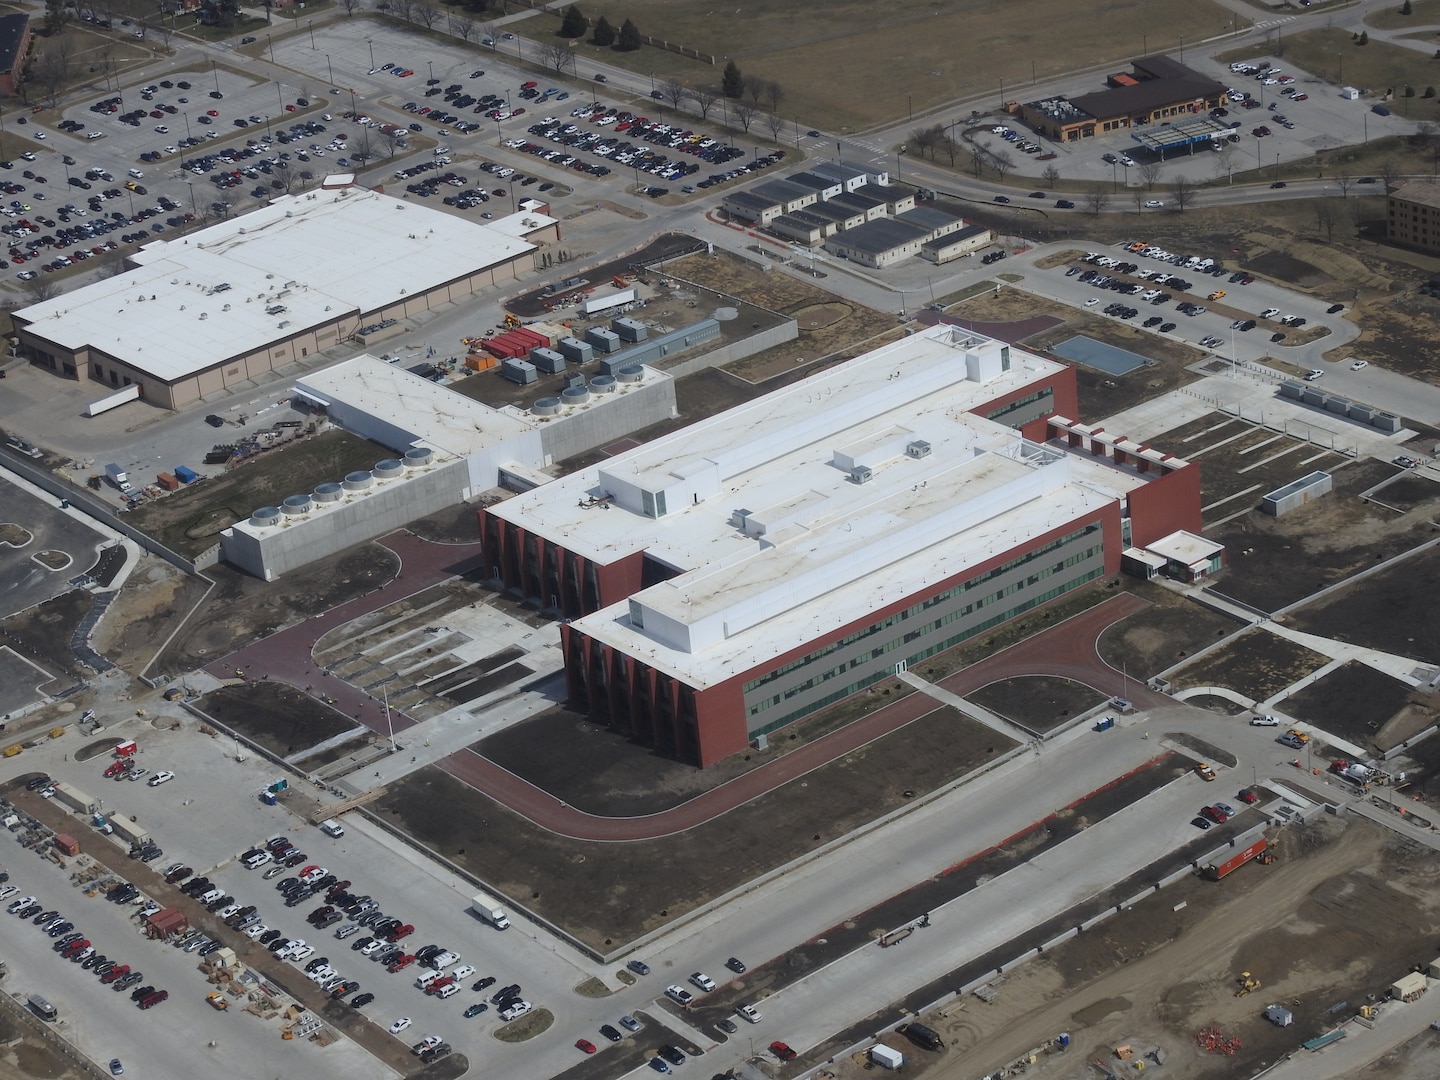 A March 30, 2018 aerial photo of U.S. Strategic Command’s (USSTRATCOM) new Command and Control Facility shows the project’s progress.